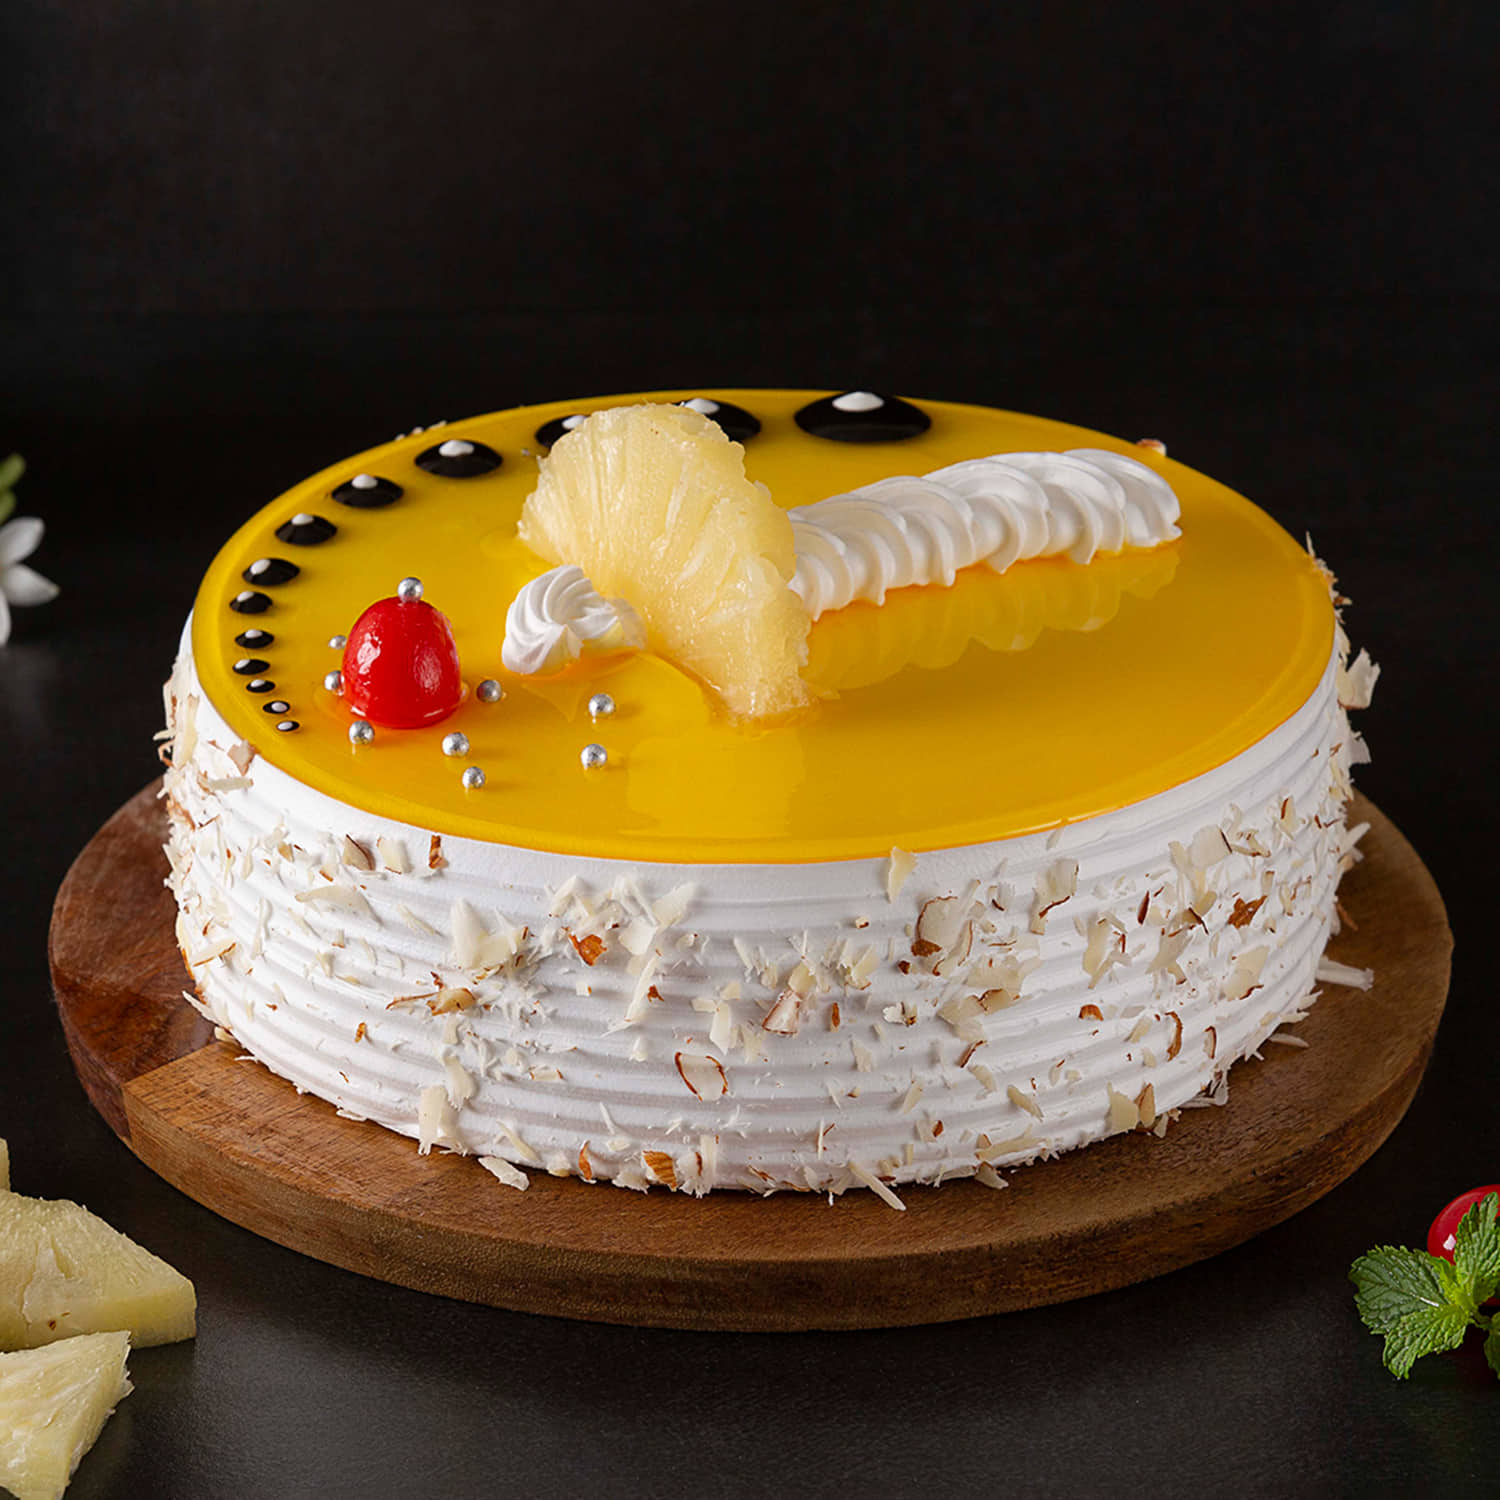 Where to order the creamiest, most decadent wedding cakes in Delhi